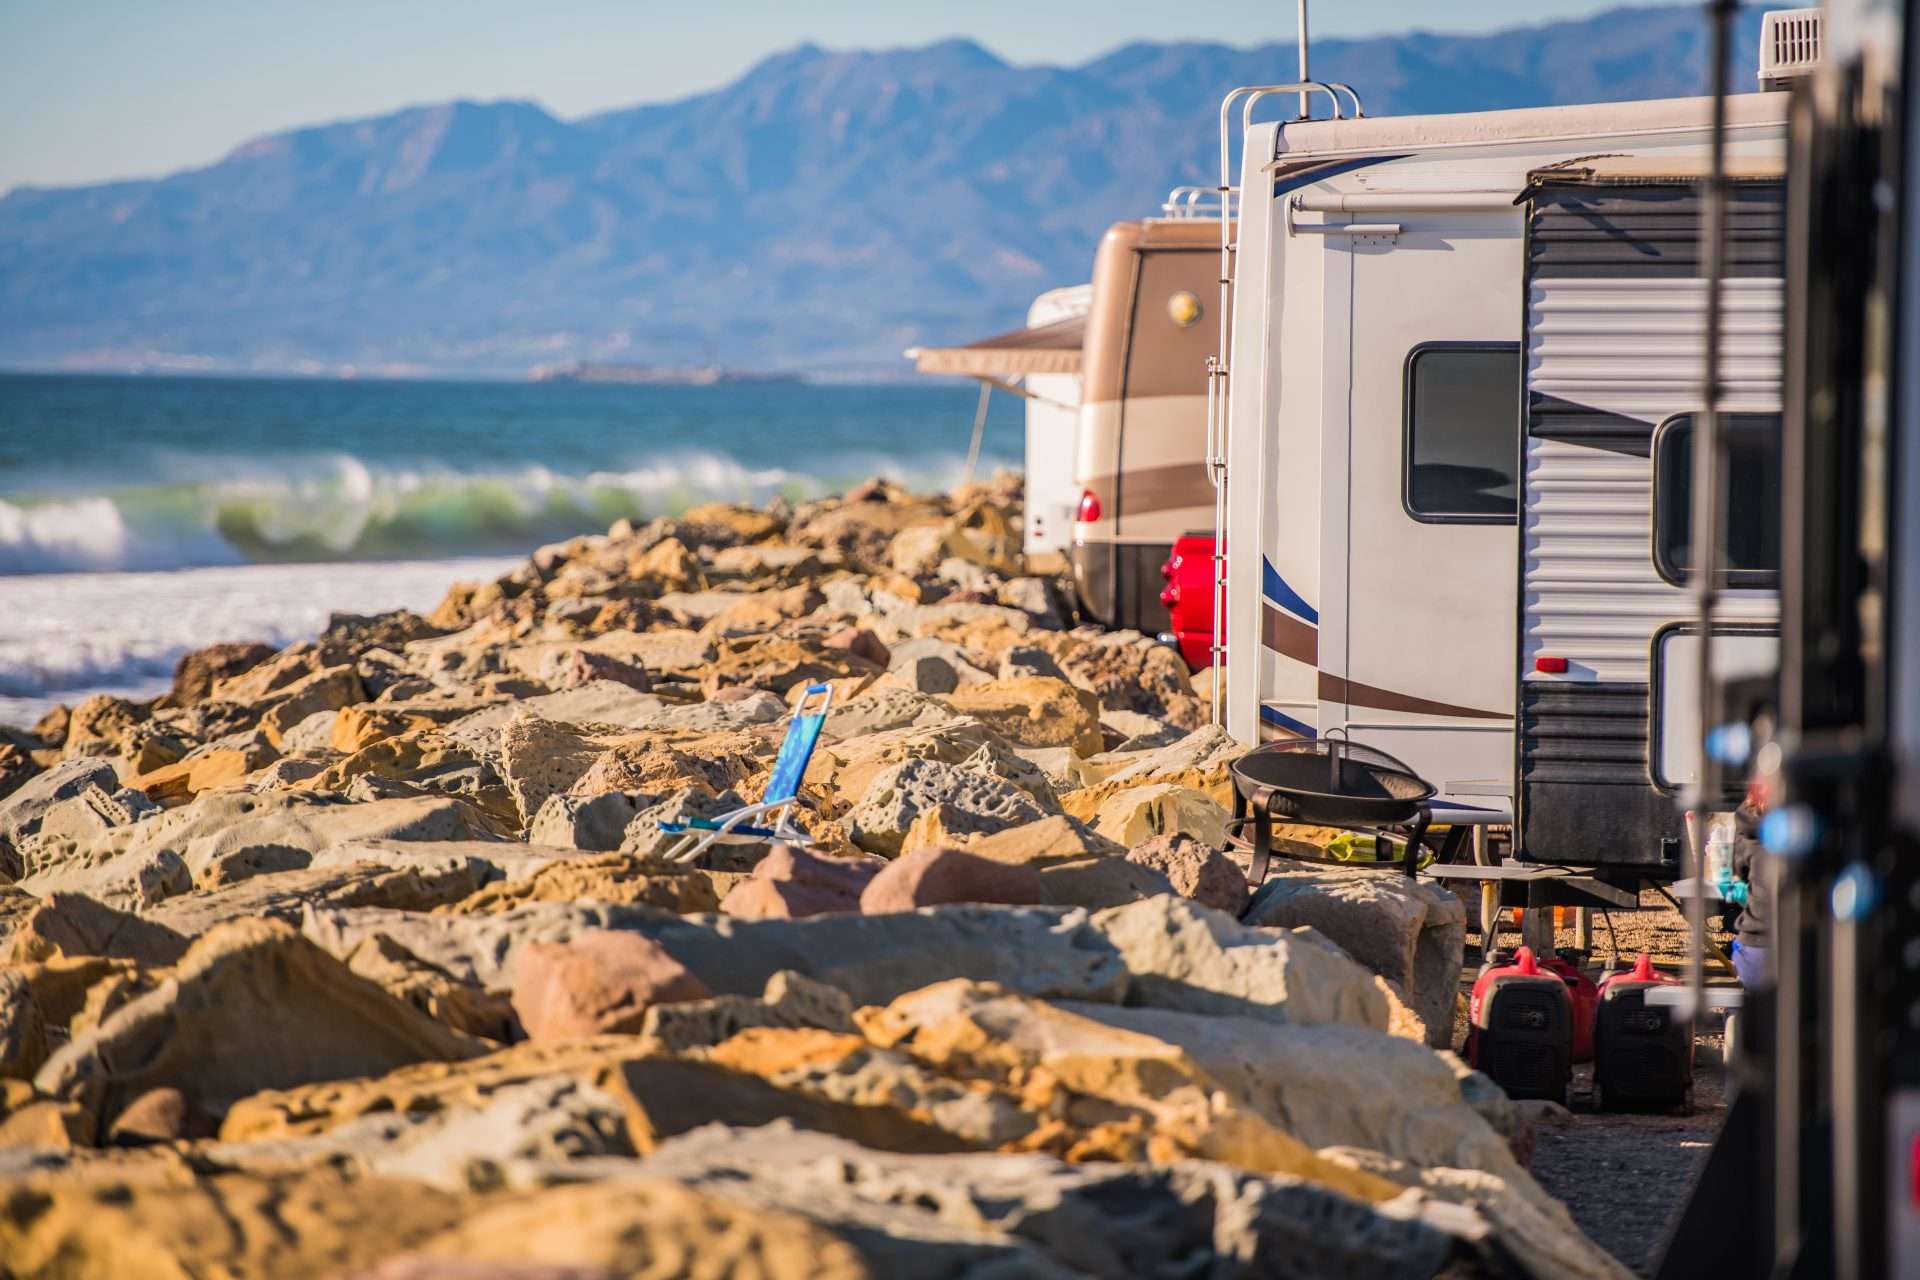 RVs parked on beach for boondocking.